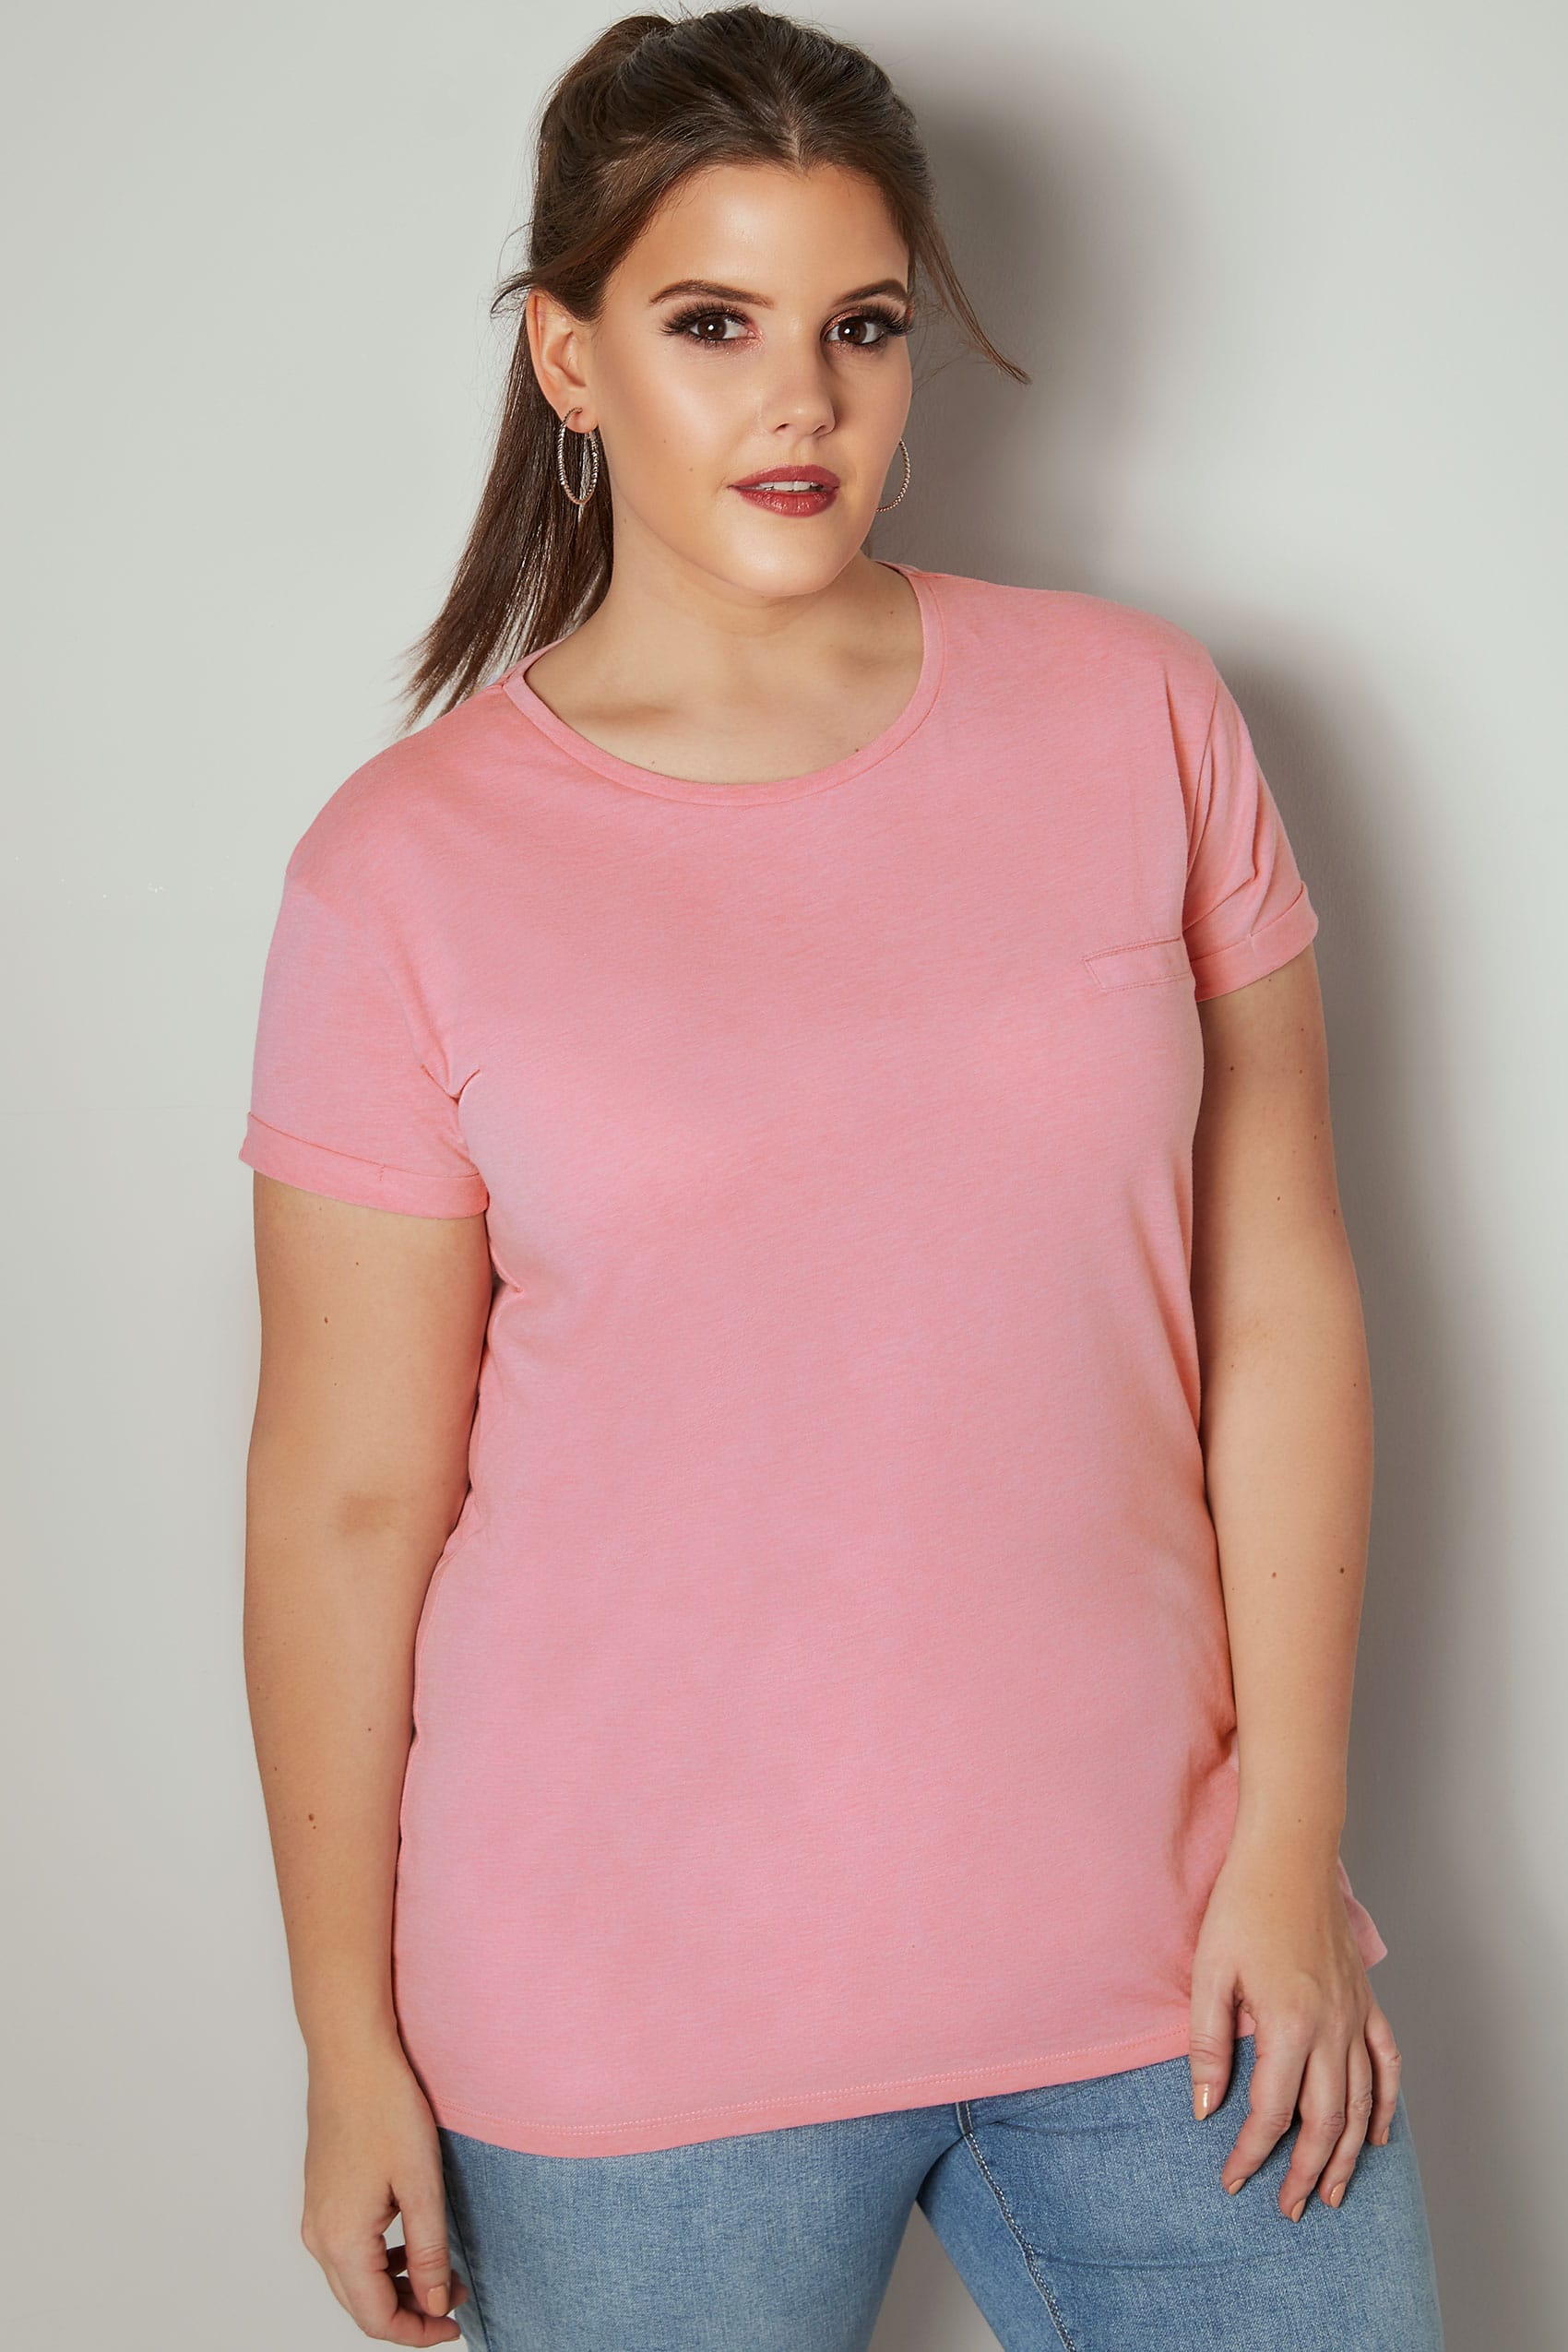 Pink Pocket T-Shirt With Curved Hem, Plus size 16 to 36